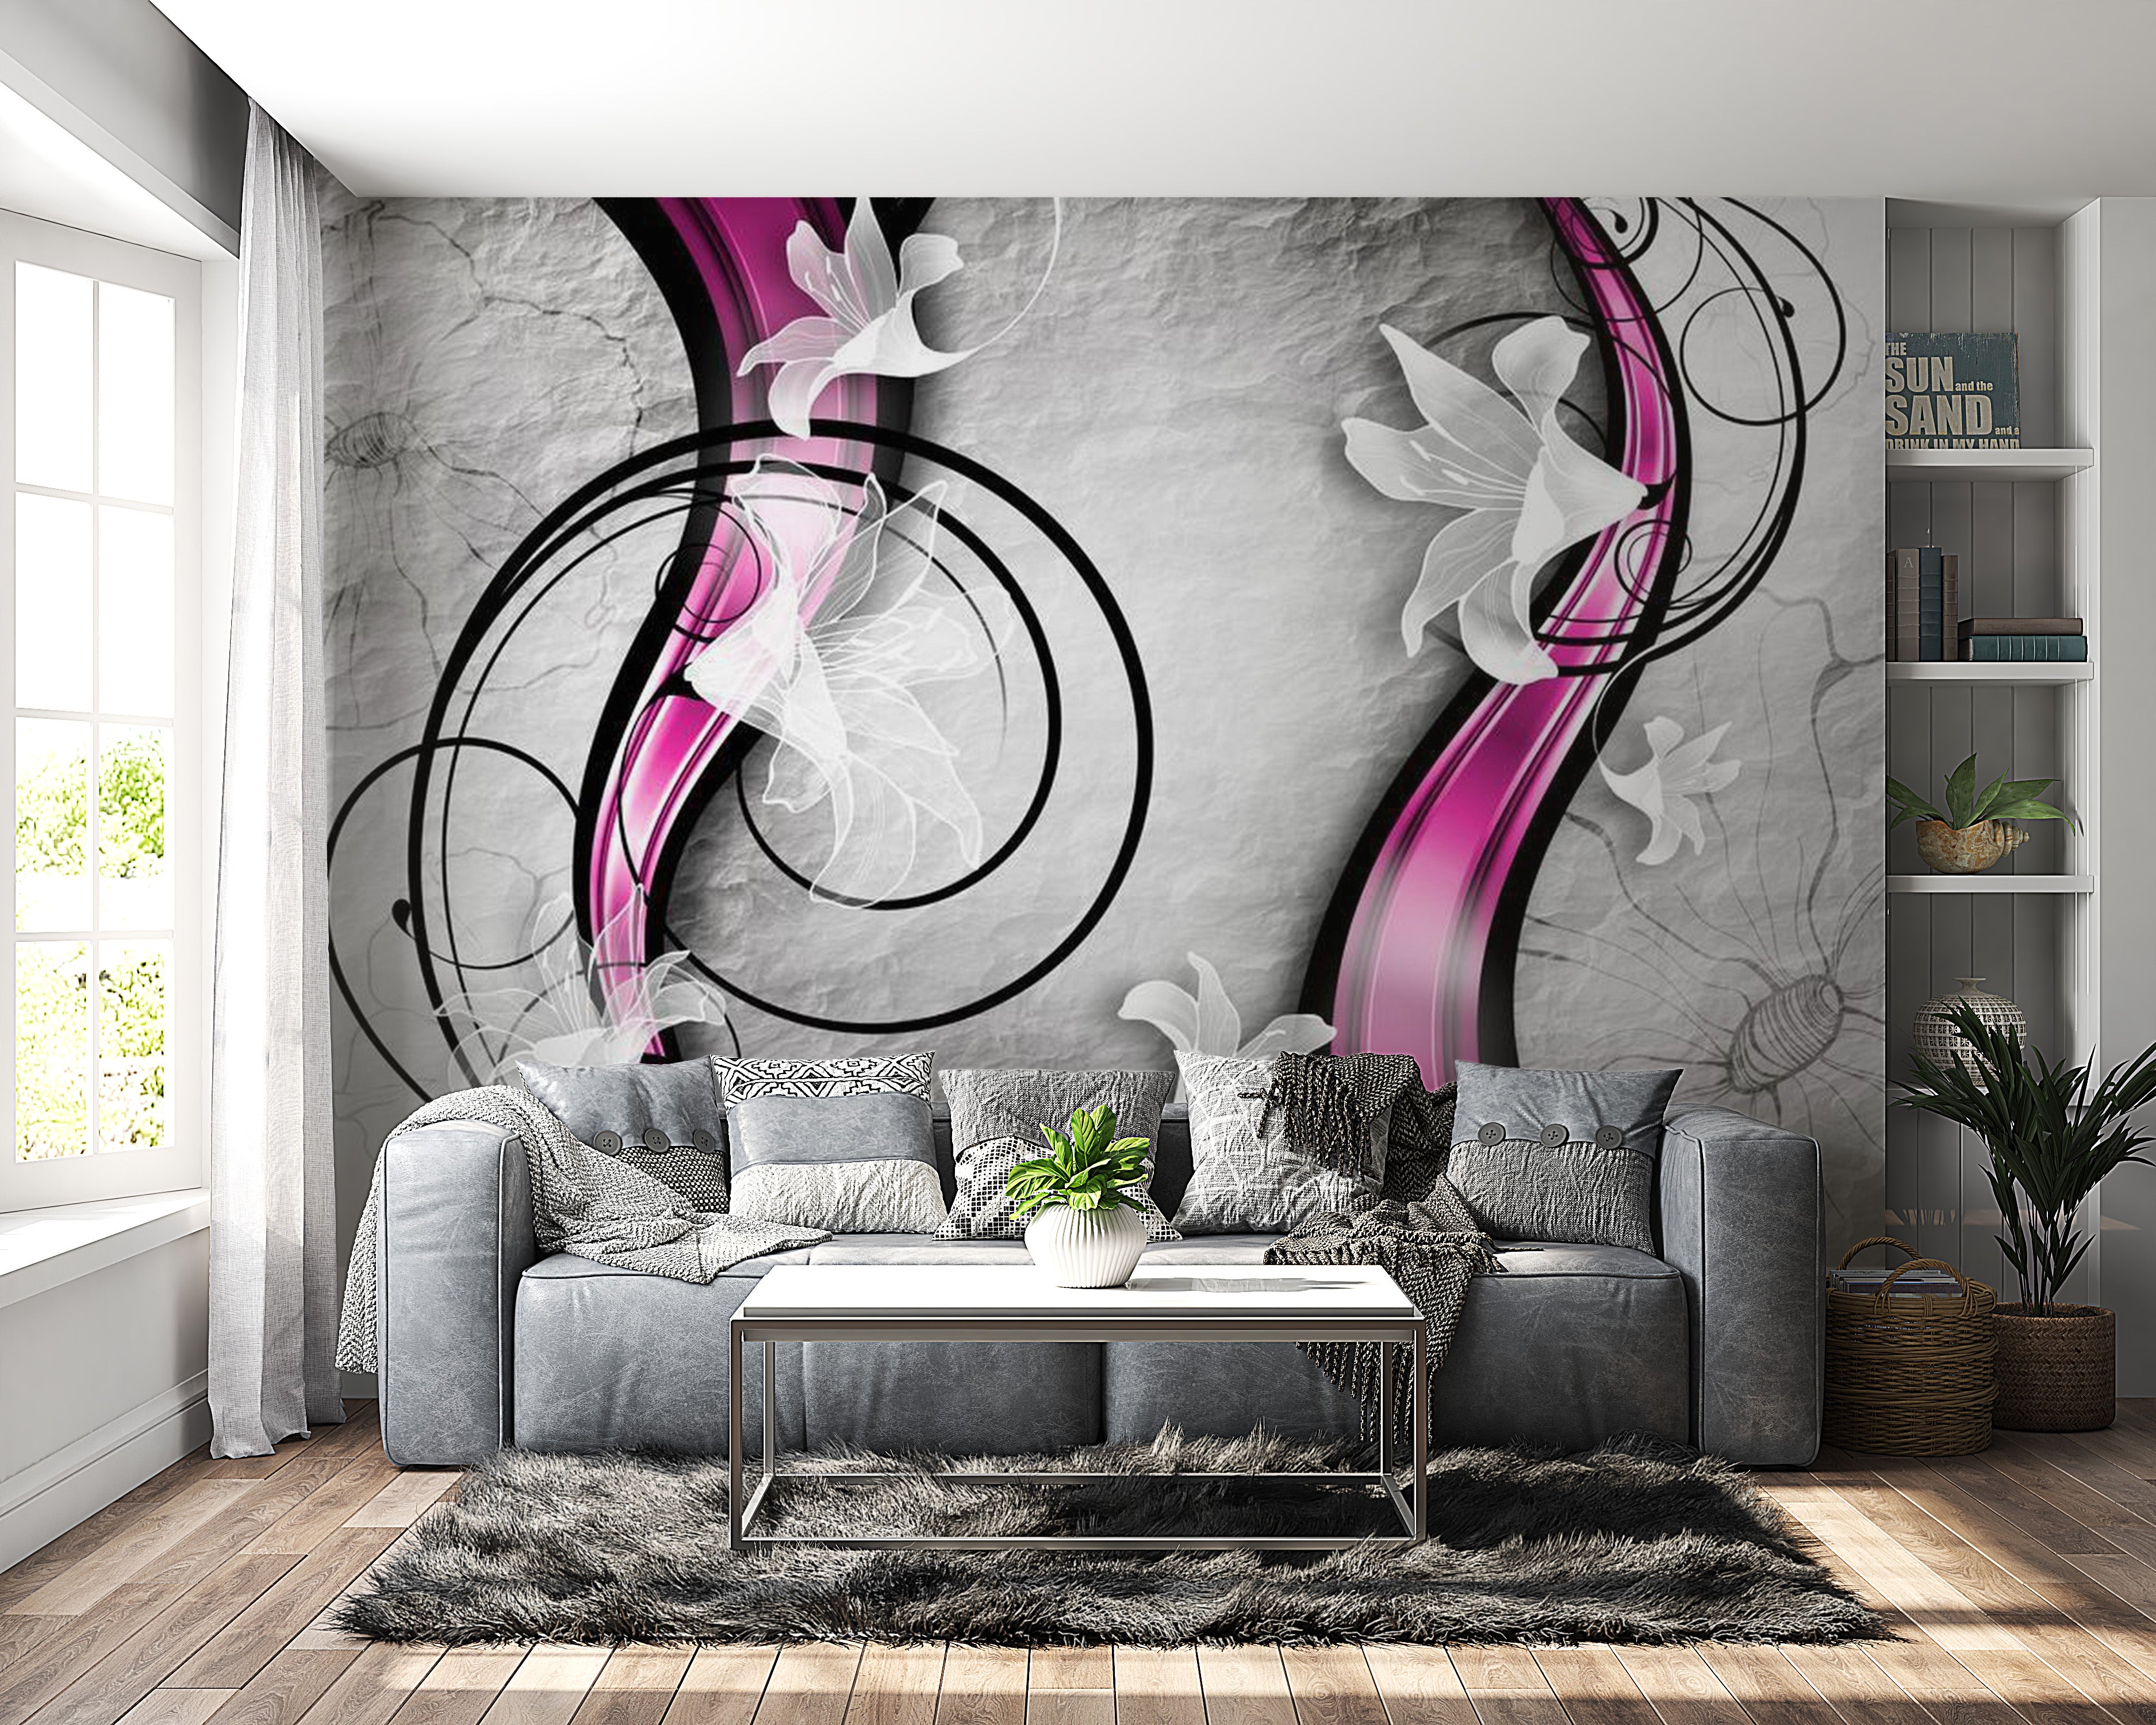 Peel & Stick Floral Wall Mural - Dance With Lilies - Removable Wall Decals